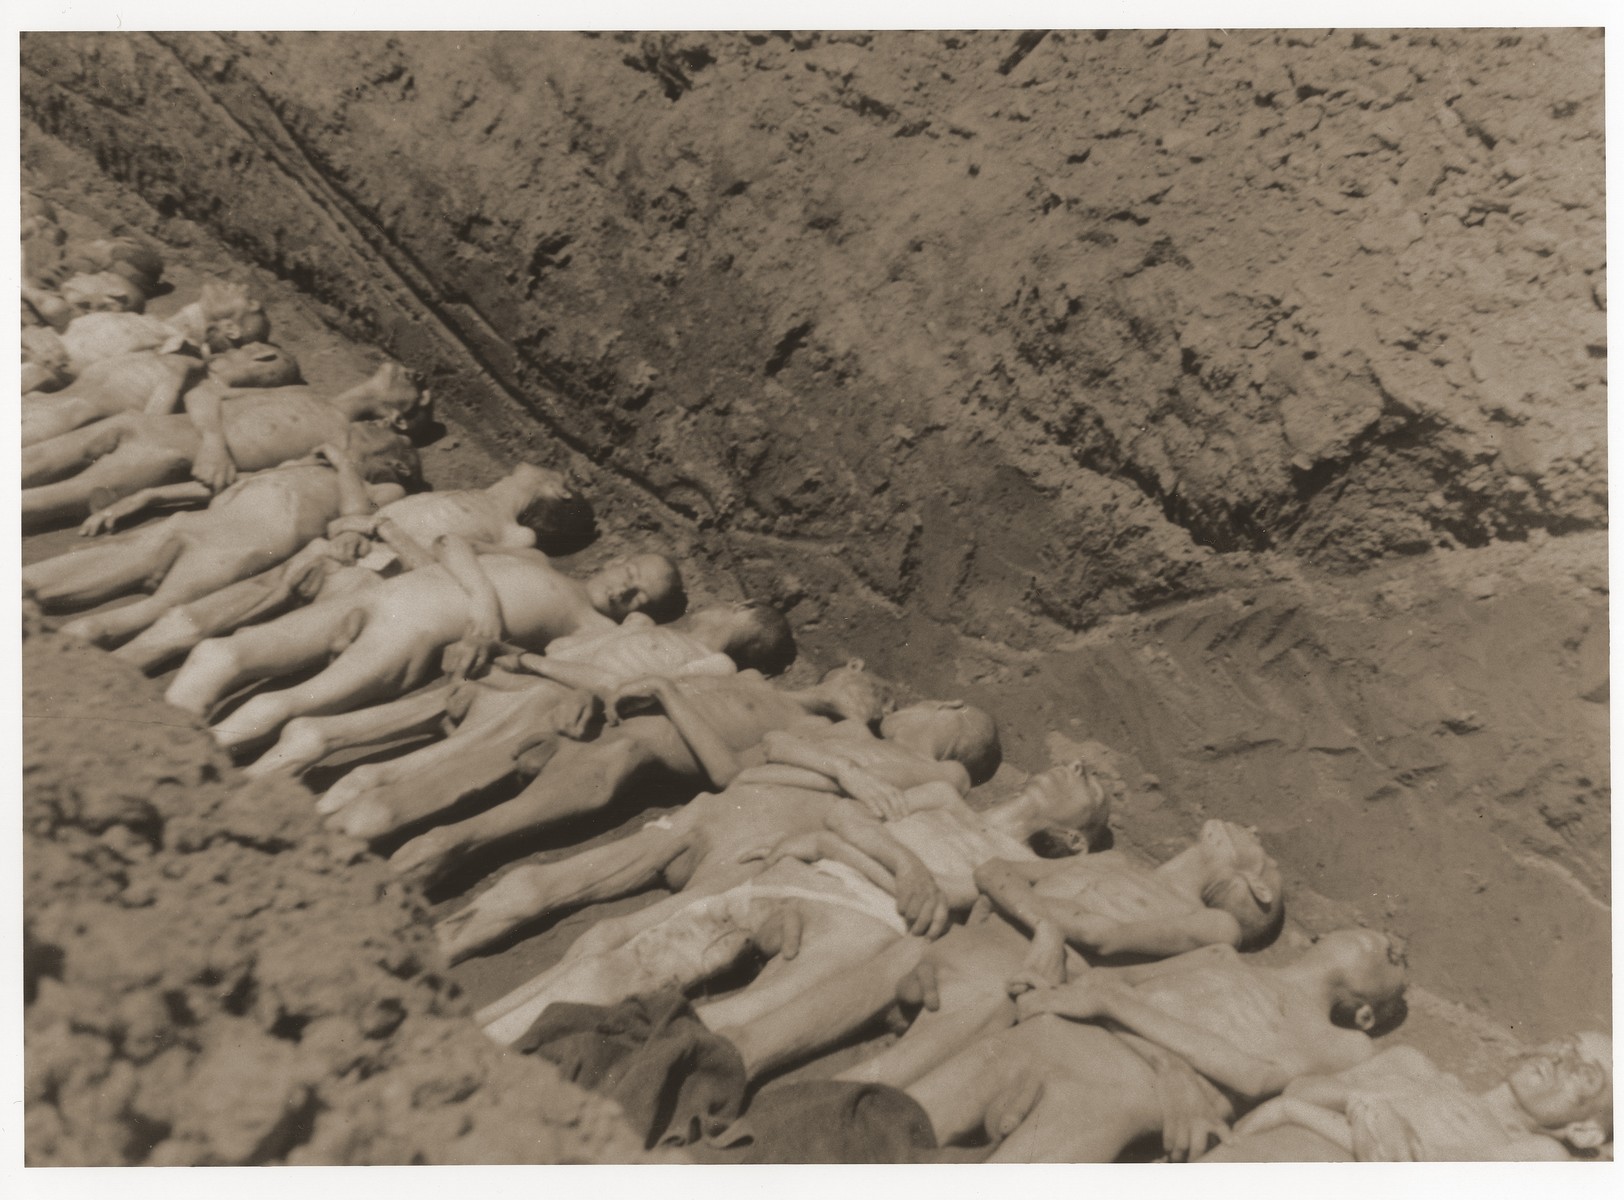 The bodies of former inmates are laid out in a mass grave in the Mauthausen concentration camp.